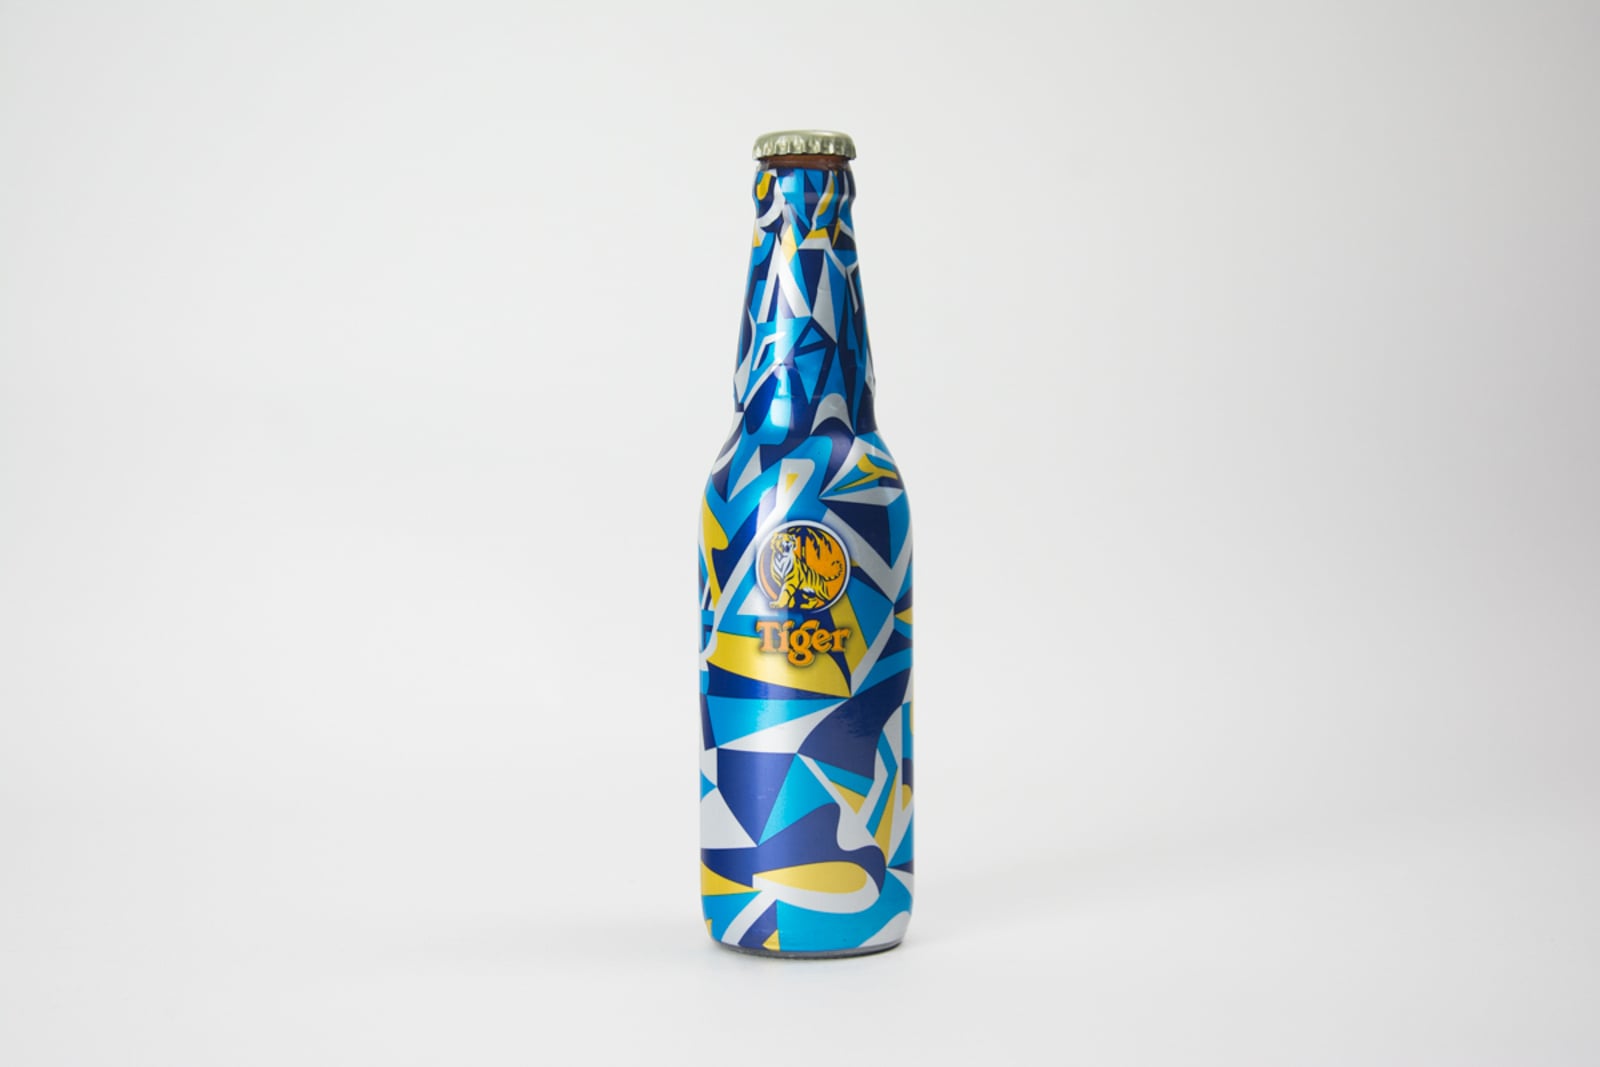 Tiger Beer Bottle With Graphysics Design By Rostarr, 330ml